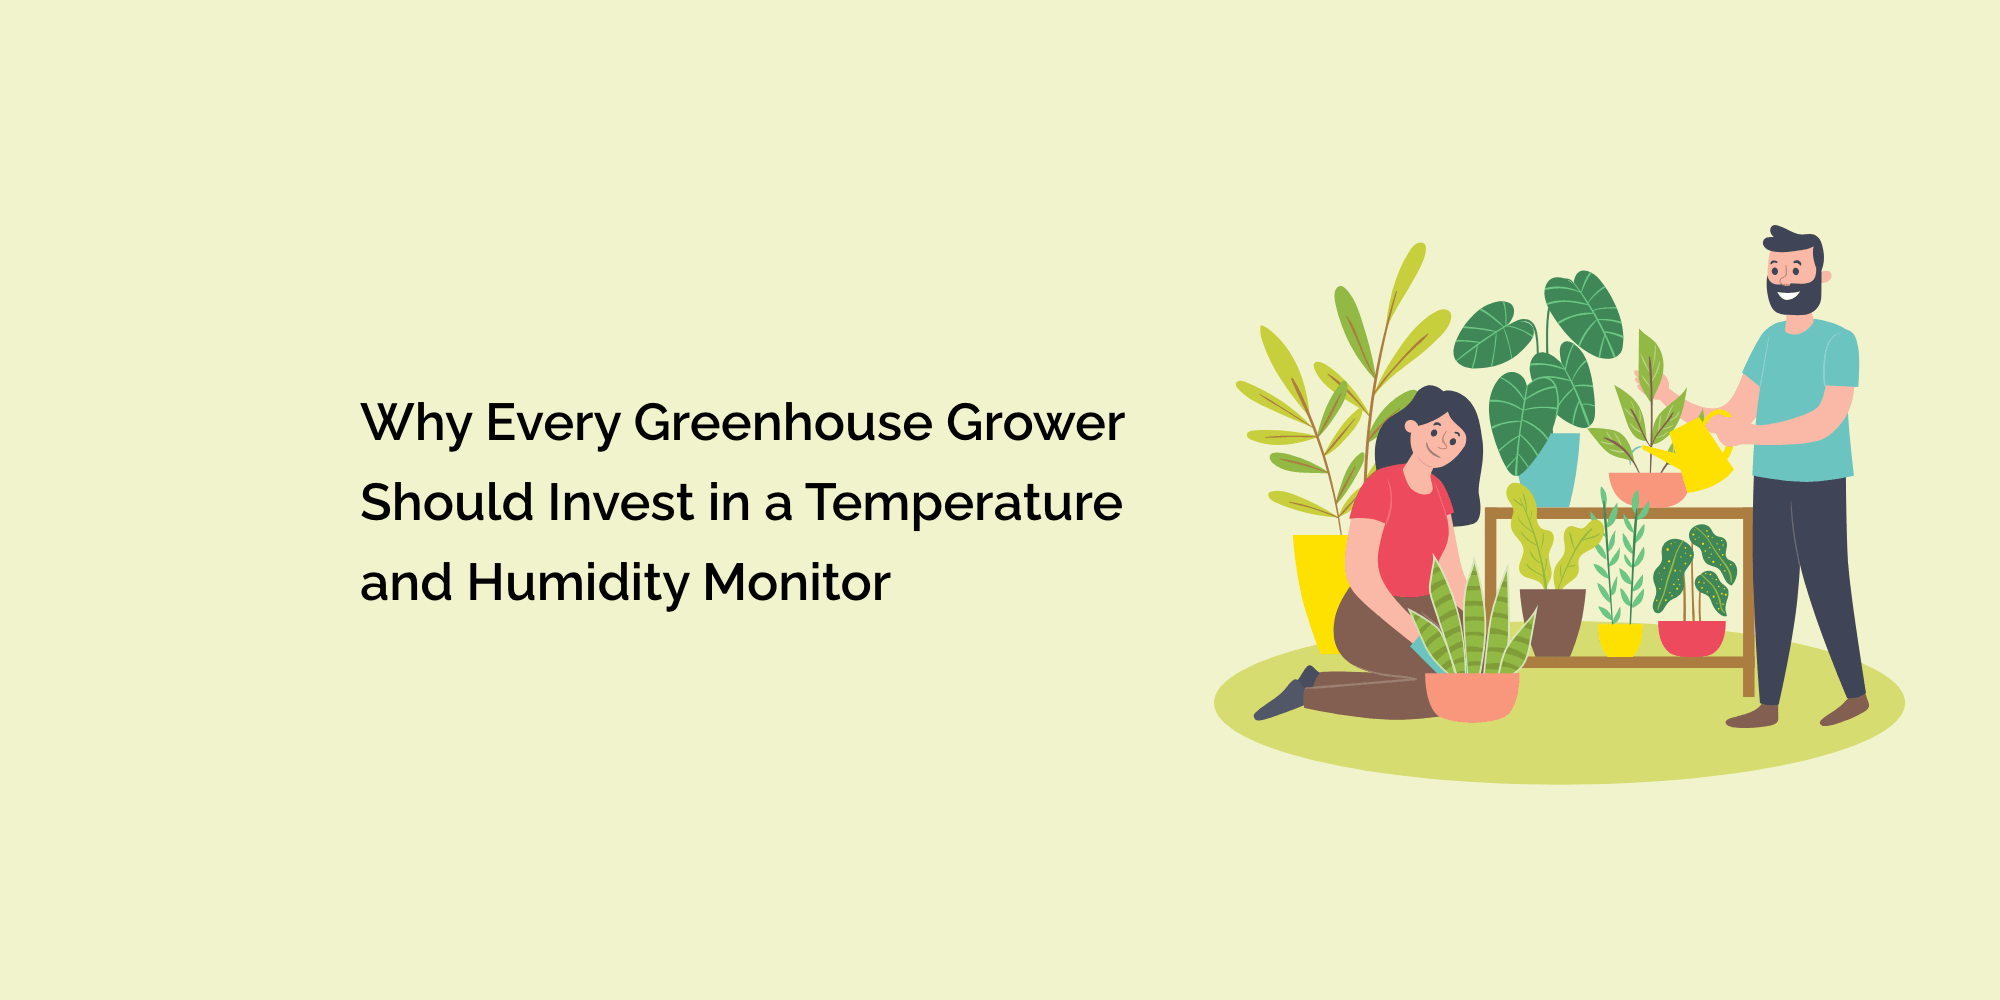 Why Every Greenhouse Grower Should Invest in a Temperature and Humidity Monitor